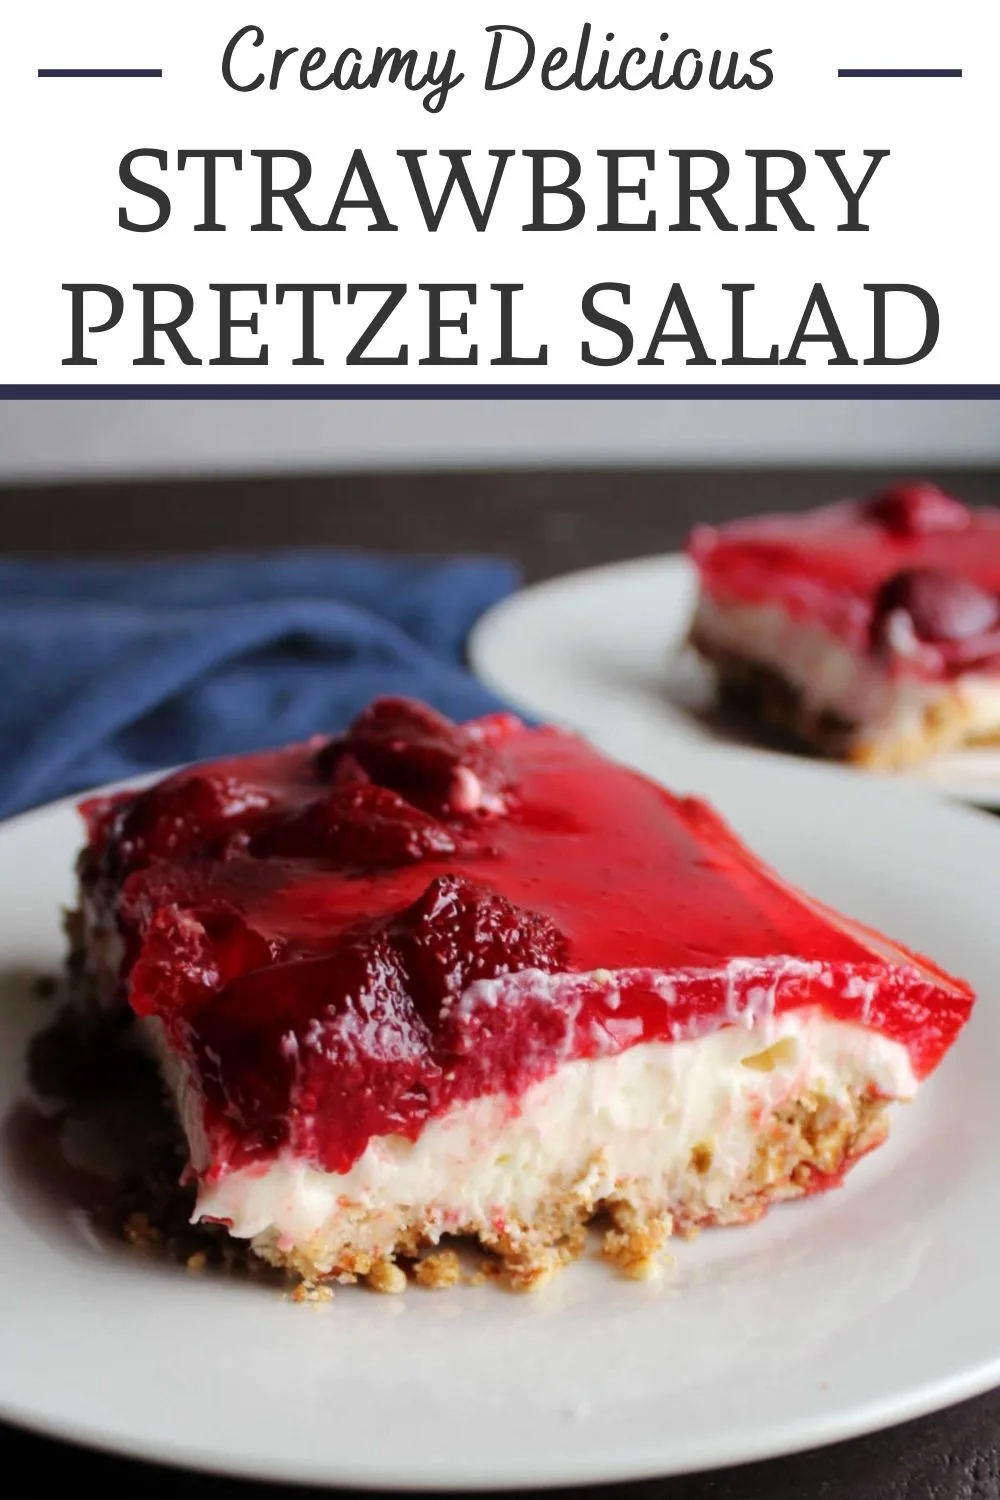 Strawberry pretzel salad is a summer staple. It has layers of salty pretzel crust, a creamy cheesecake like center and yummy strawberry topping. It is perfect for BBQs and family reunions.